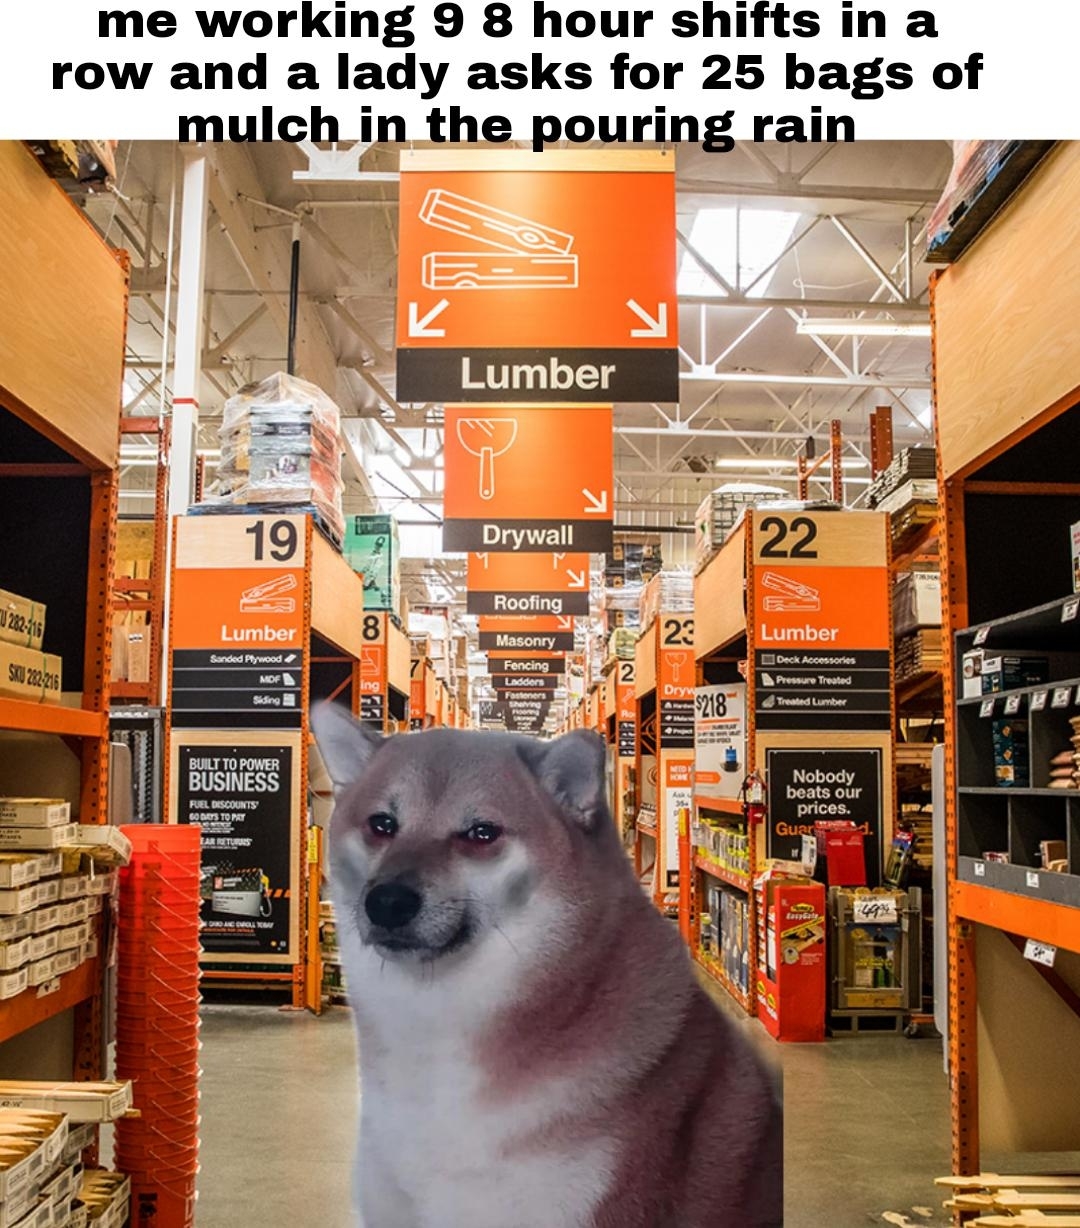 Dog standing in a hardware store aisle labeled &quot;Lumber.&quot; Top text: &quot;me working 9 8 hour shifts in a row and a lady asks for 25 bags of mulch in the pouring rain.&quot;